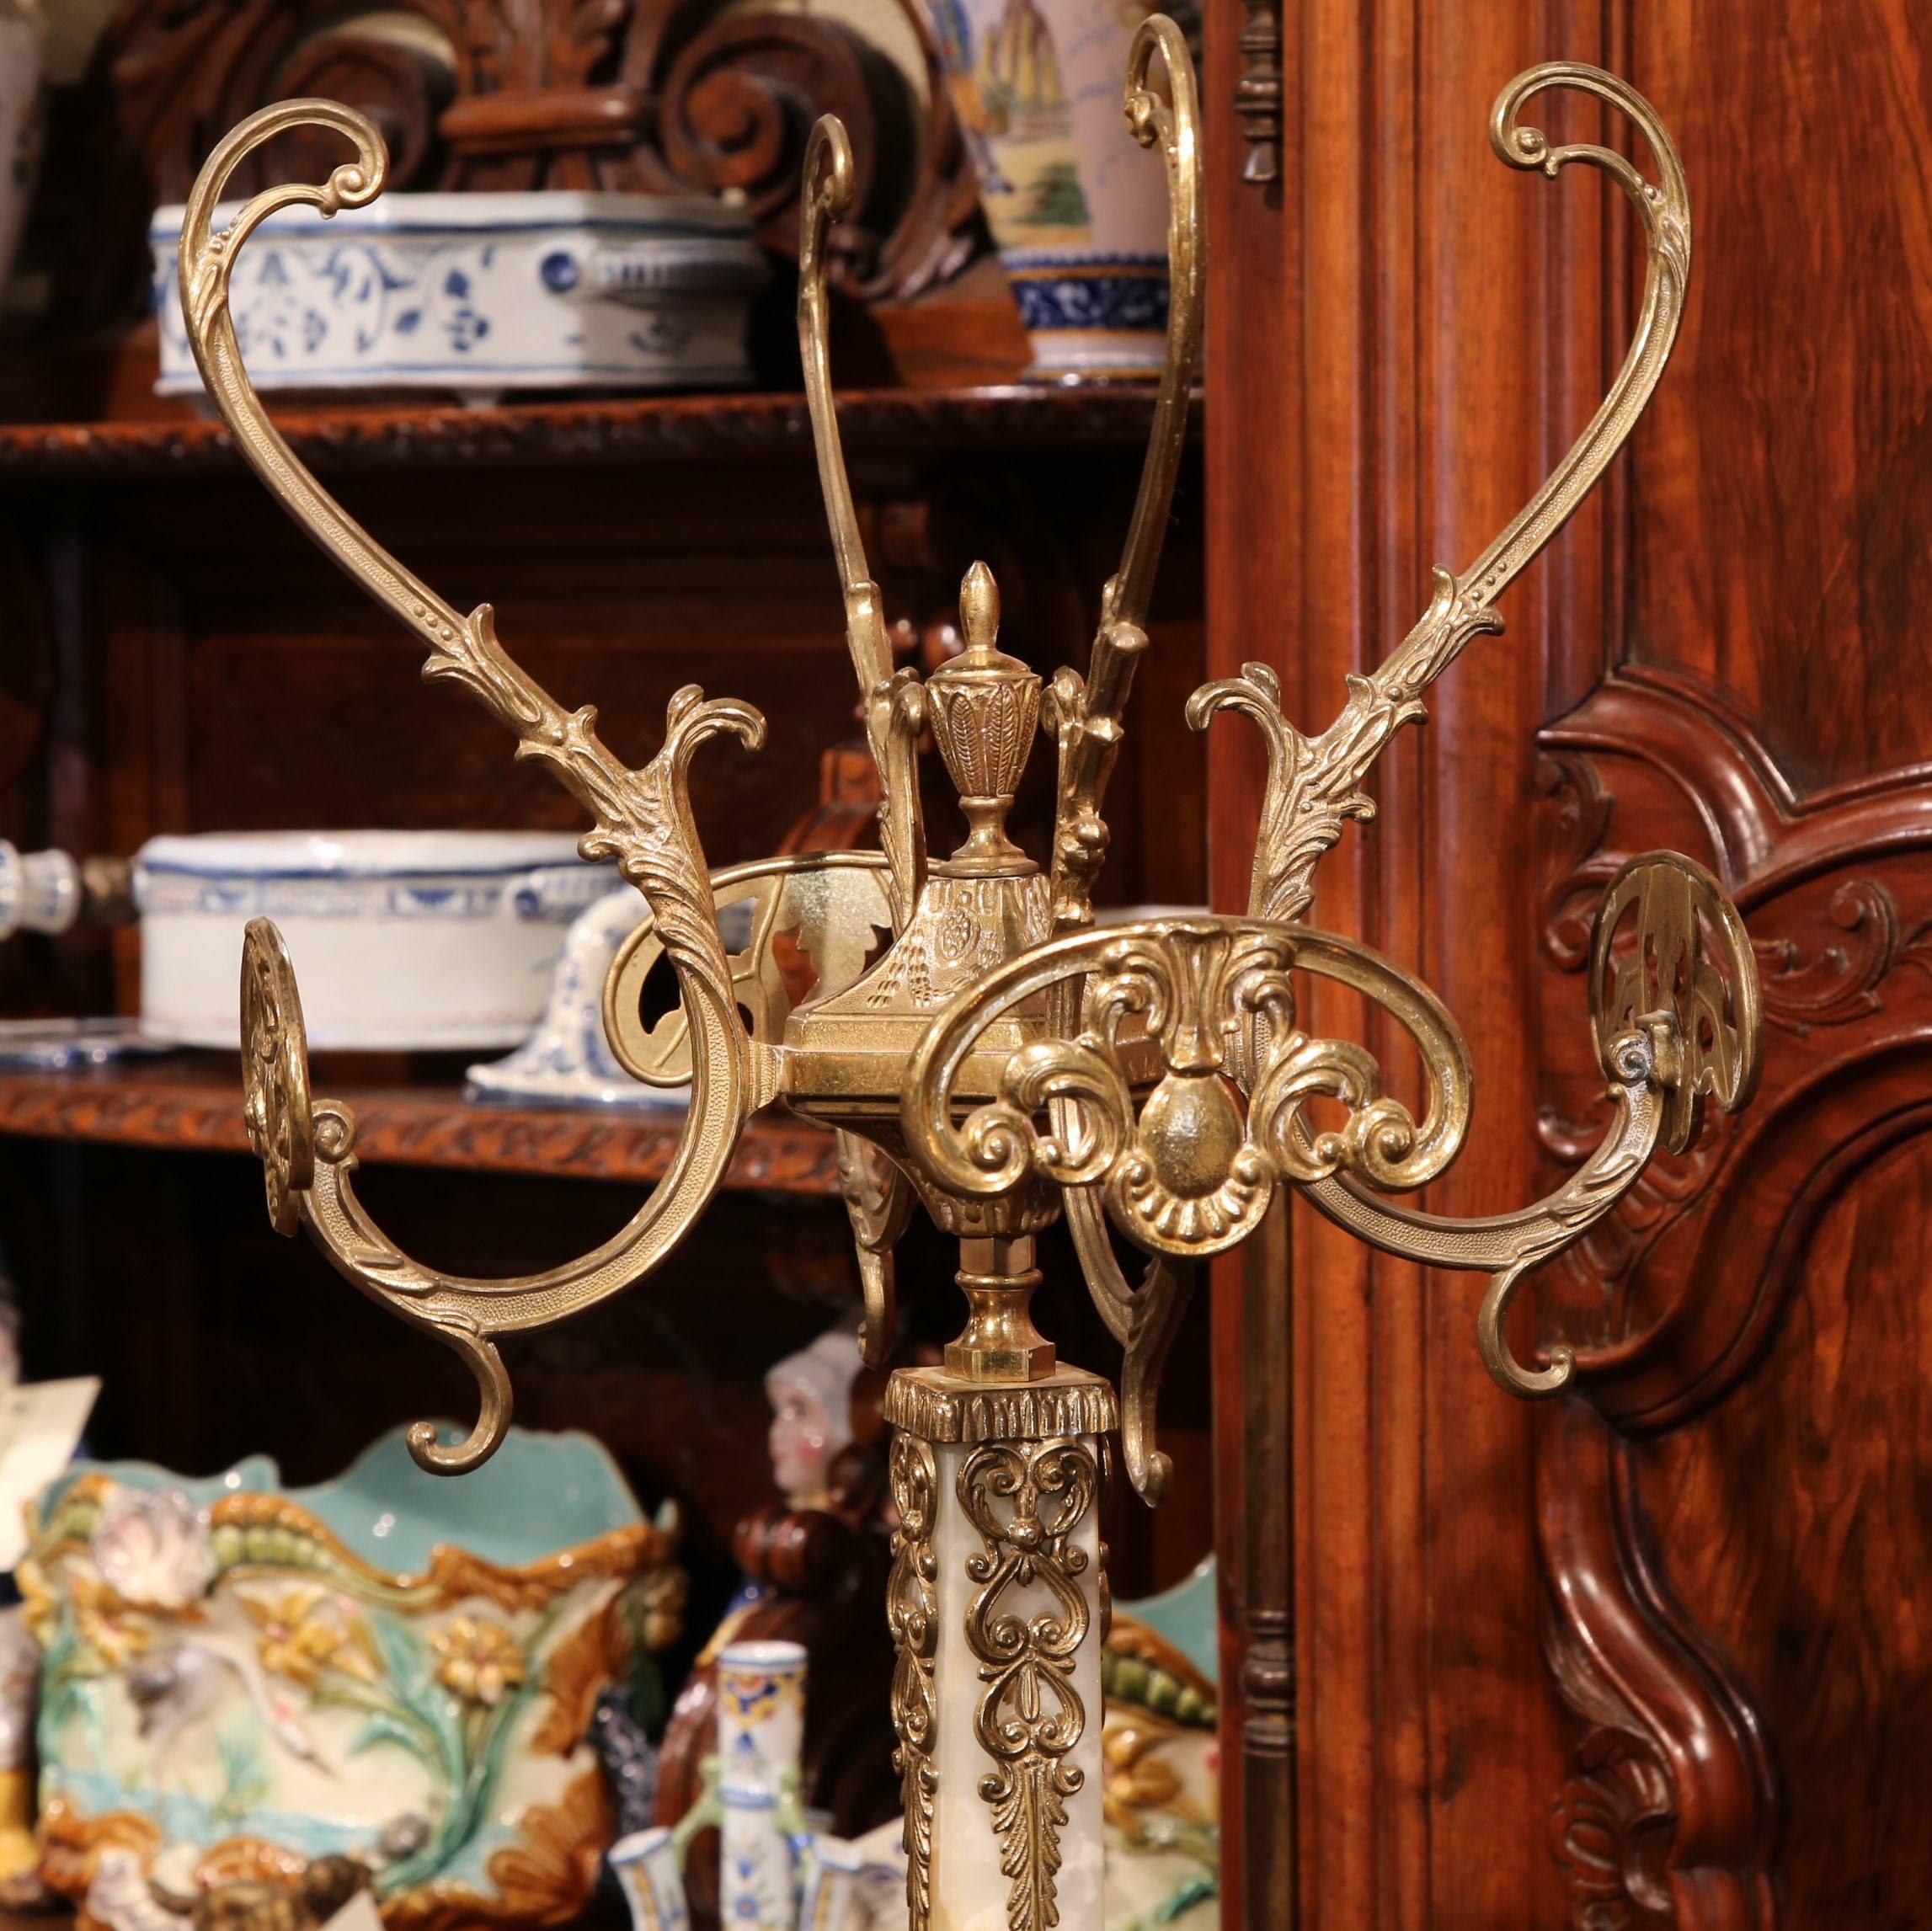 An old world addition to any home, this tall vintage hat rack is perfect to hold your clothing and adorn your entryway, master bathroom or closet. The 1960s piece is crafted from onyx and brass and has numerous details including women's faces and